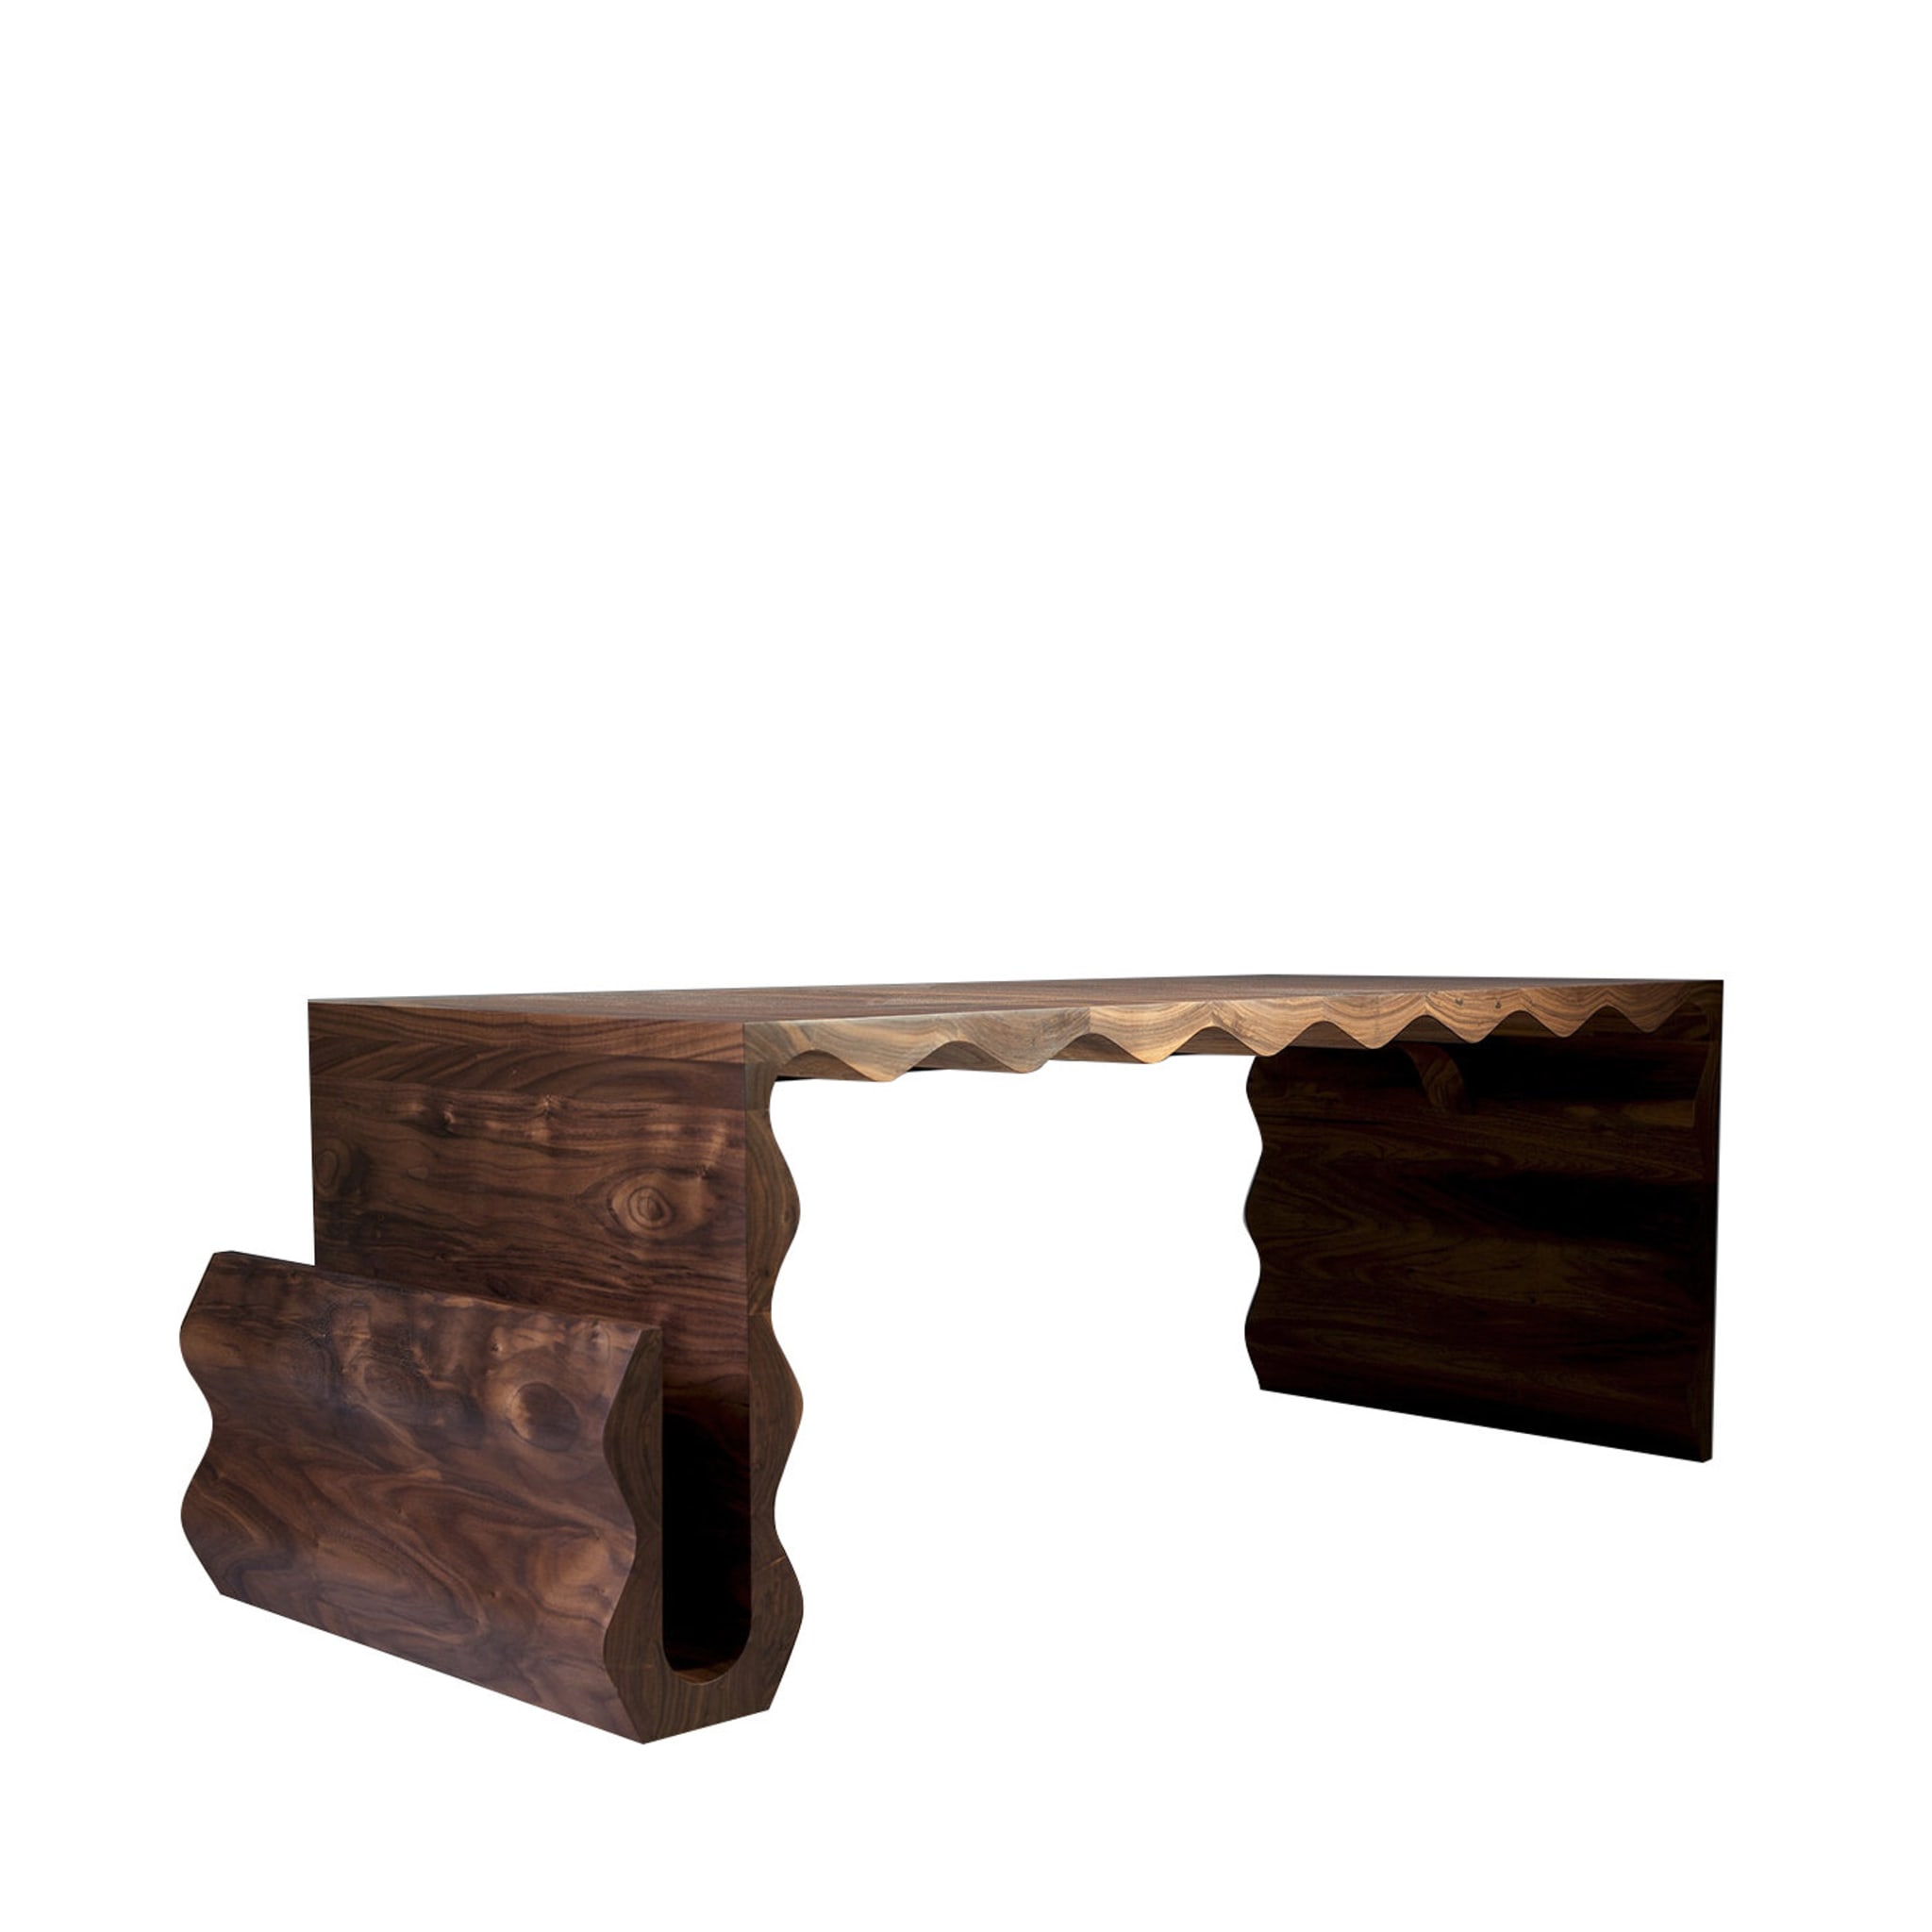 Optable Wood Couchtisch by Mauro Dell'Orco - Hauptansicht